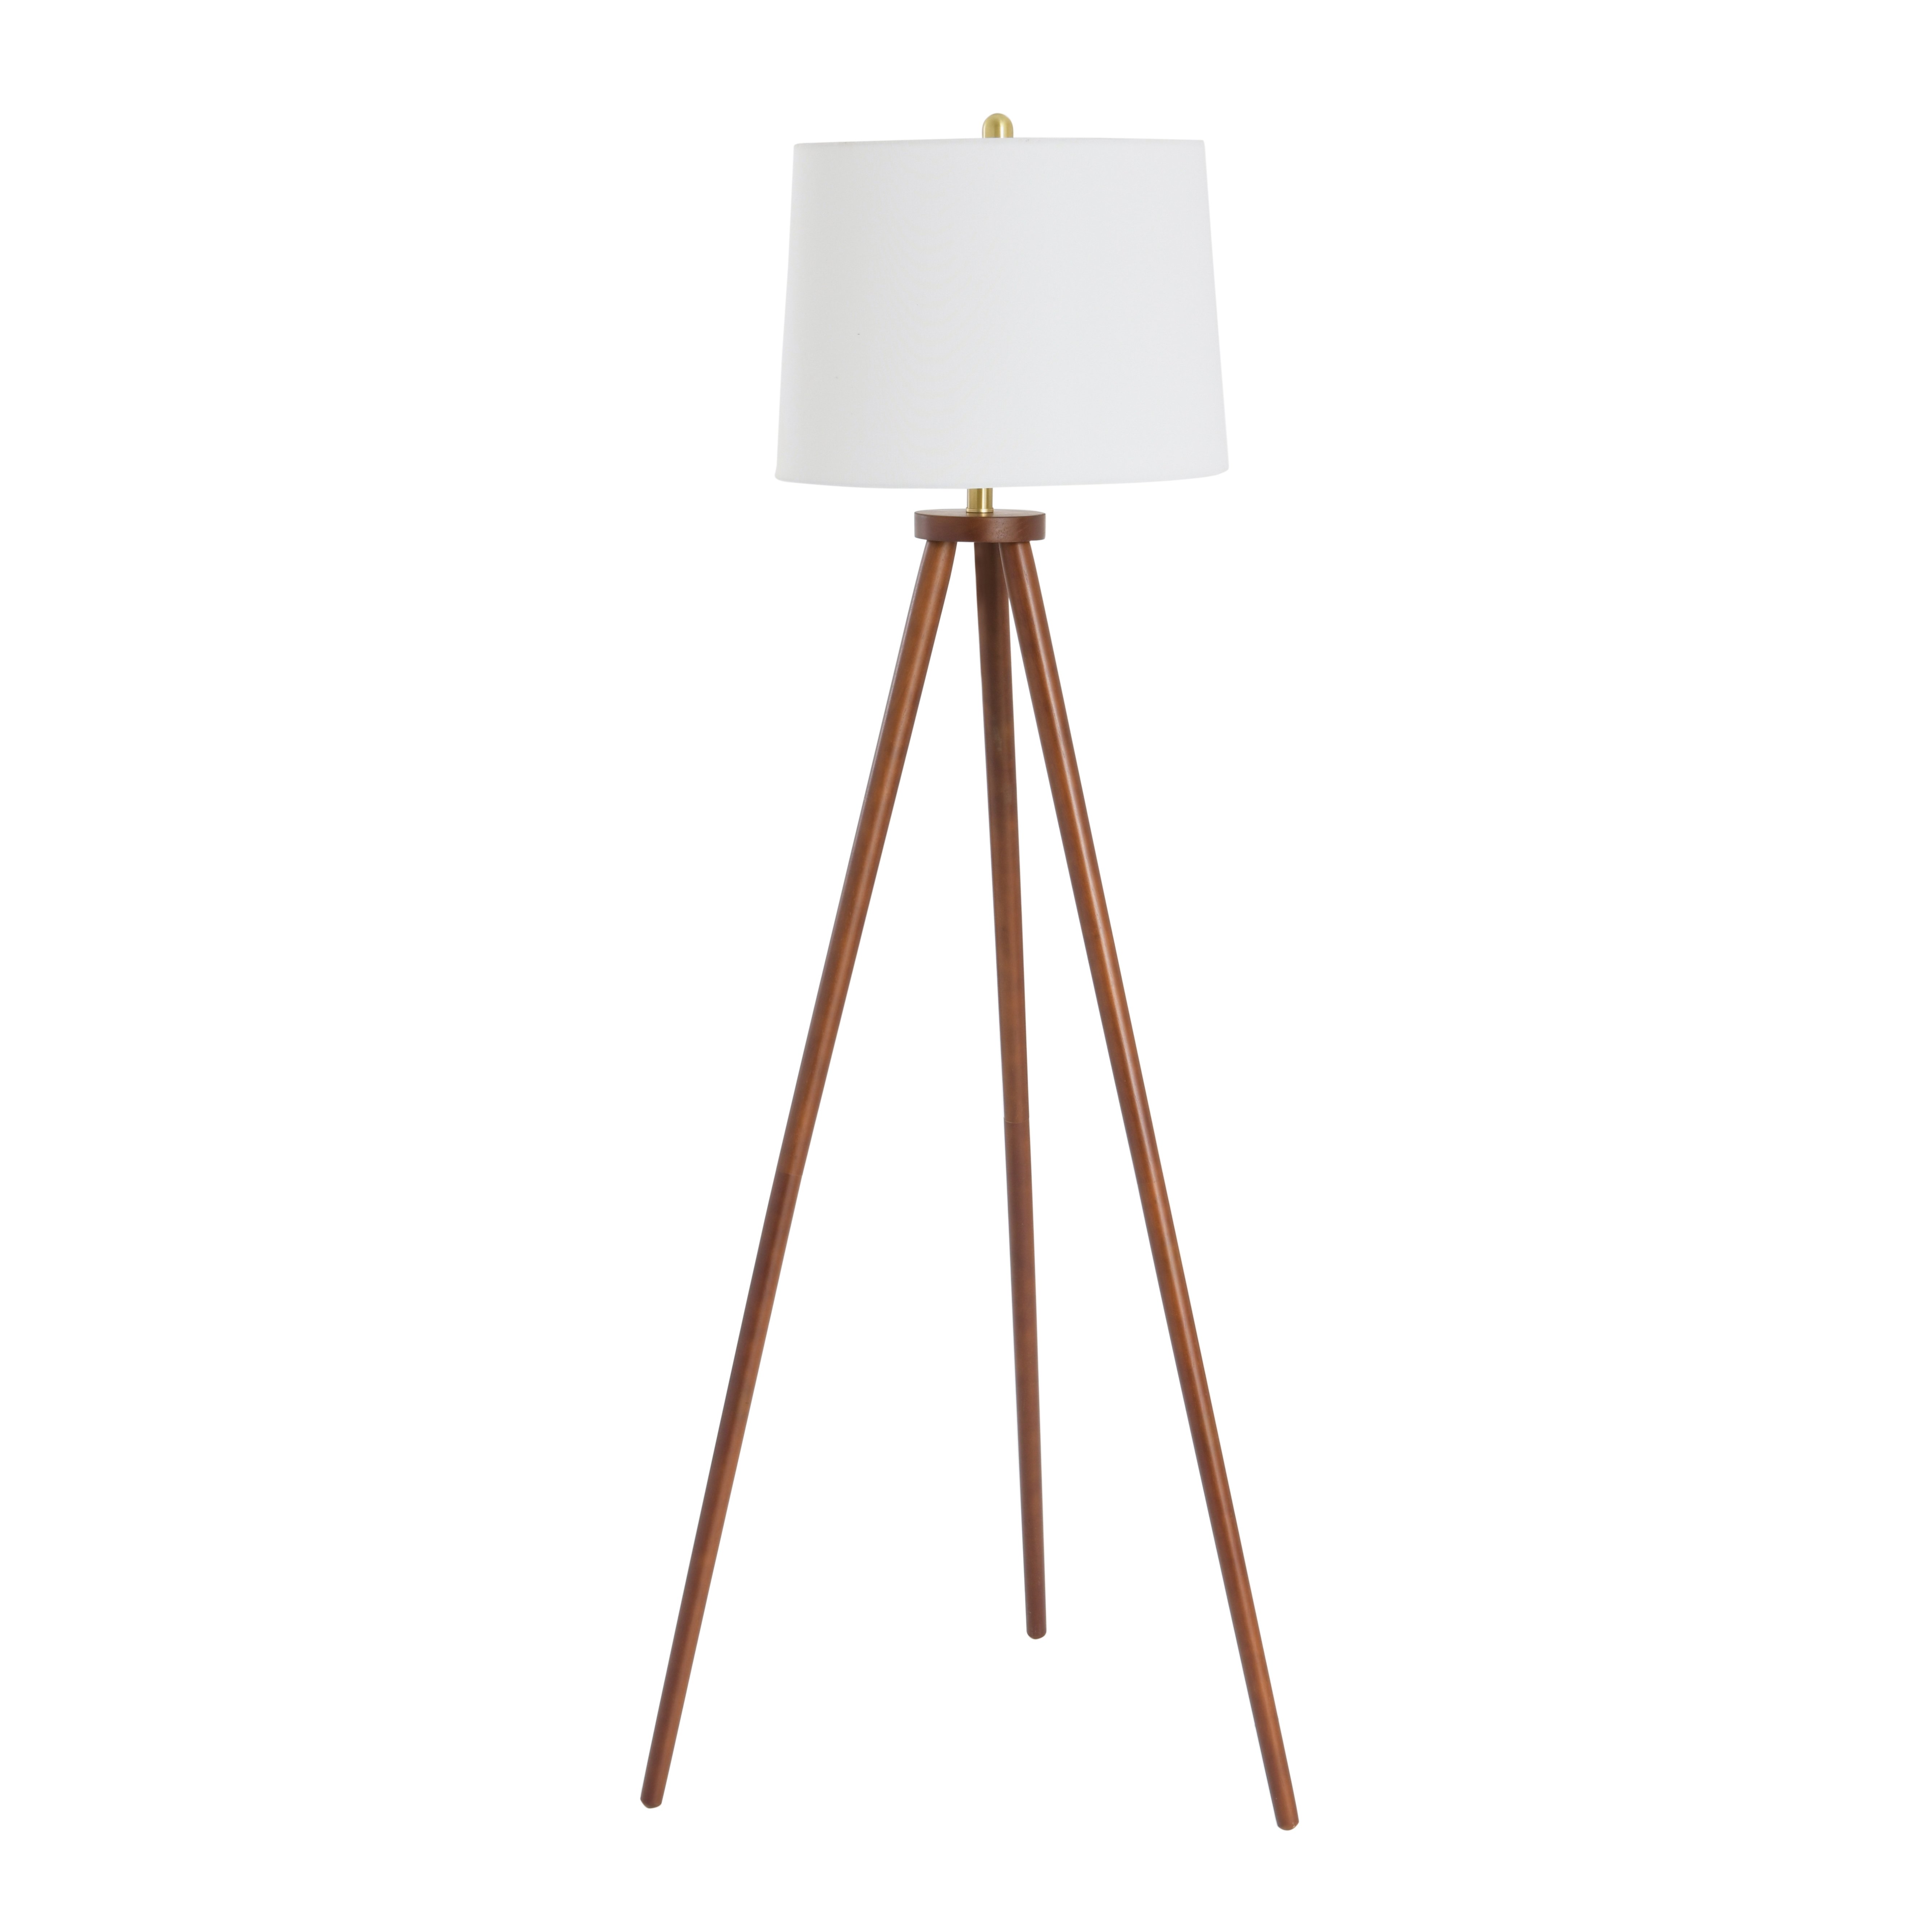 A-Frame Tripod Rubber Wood Floor Lamp with Cream Linen Shade, Espresso - Image 0